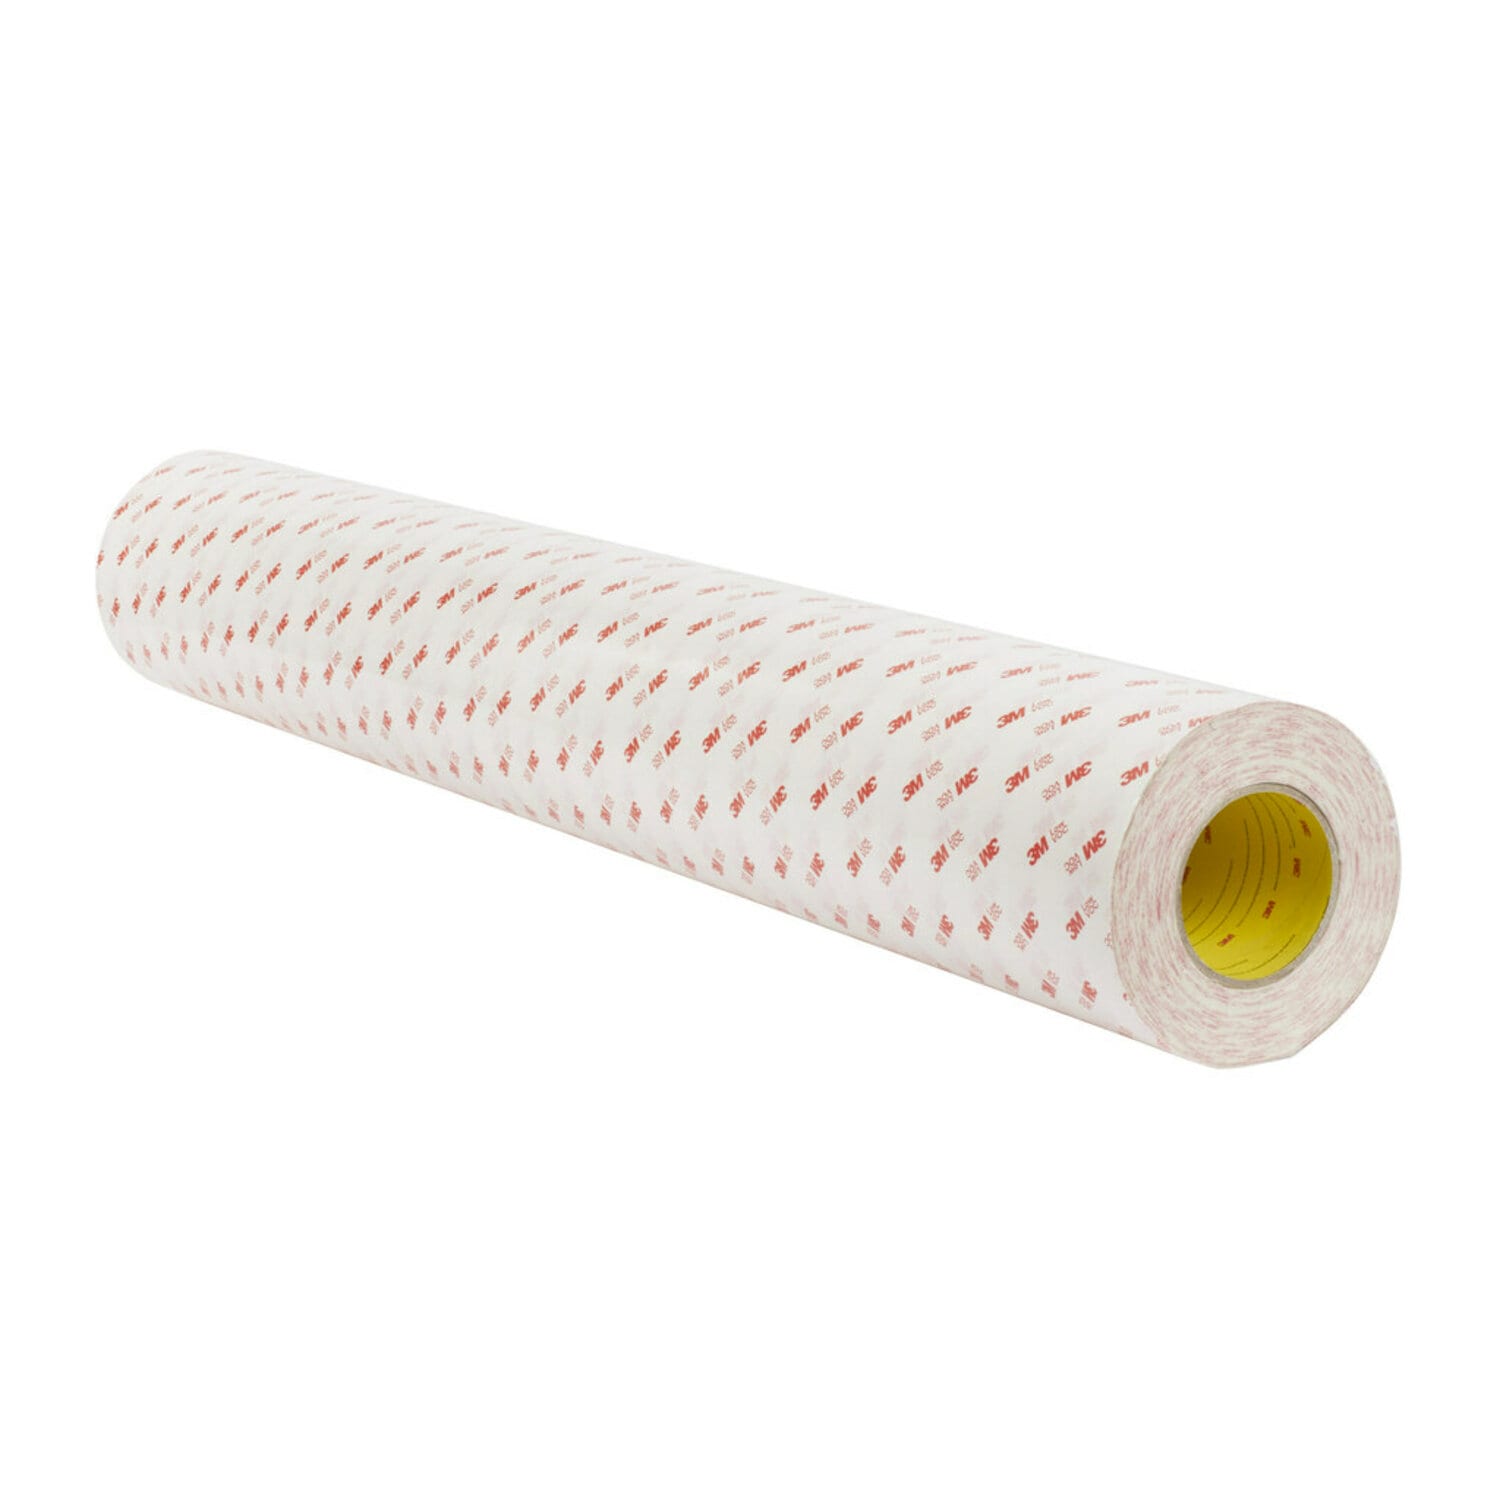 7100085670 - 3M Low VOC Double Coated Tissue Tape 99015LVC, Clear, 1000 mm x 50 m,
0.15 mm, 1 Roll/ Case